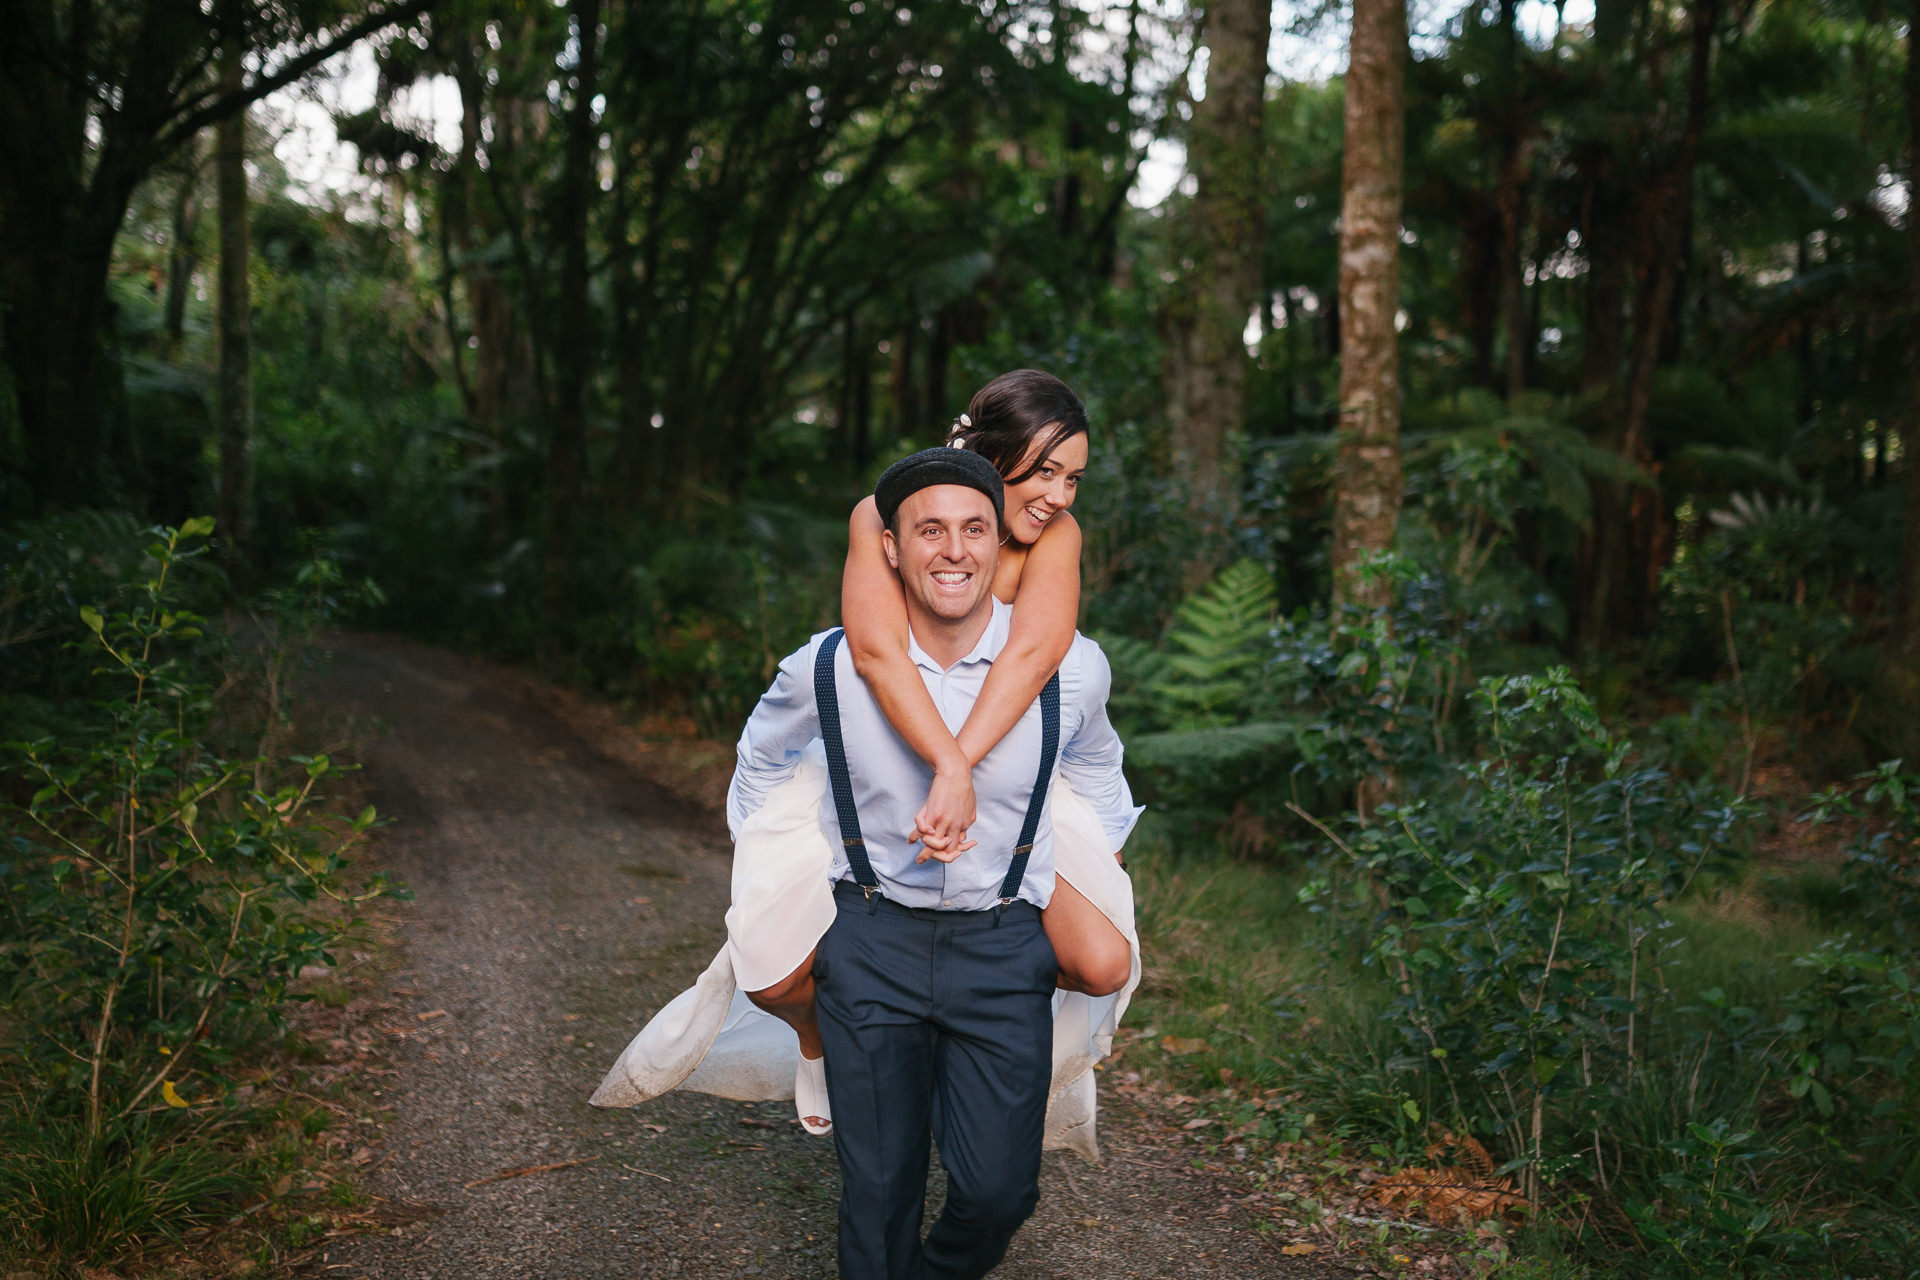 The_Official_Photographers_shannon-Noel-Pirongia-forest-park-wedding_MG_1179